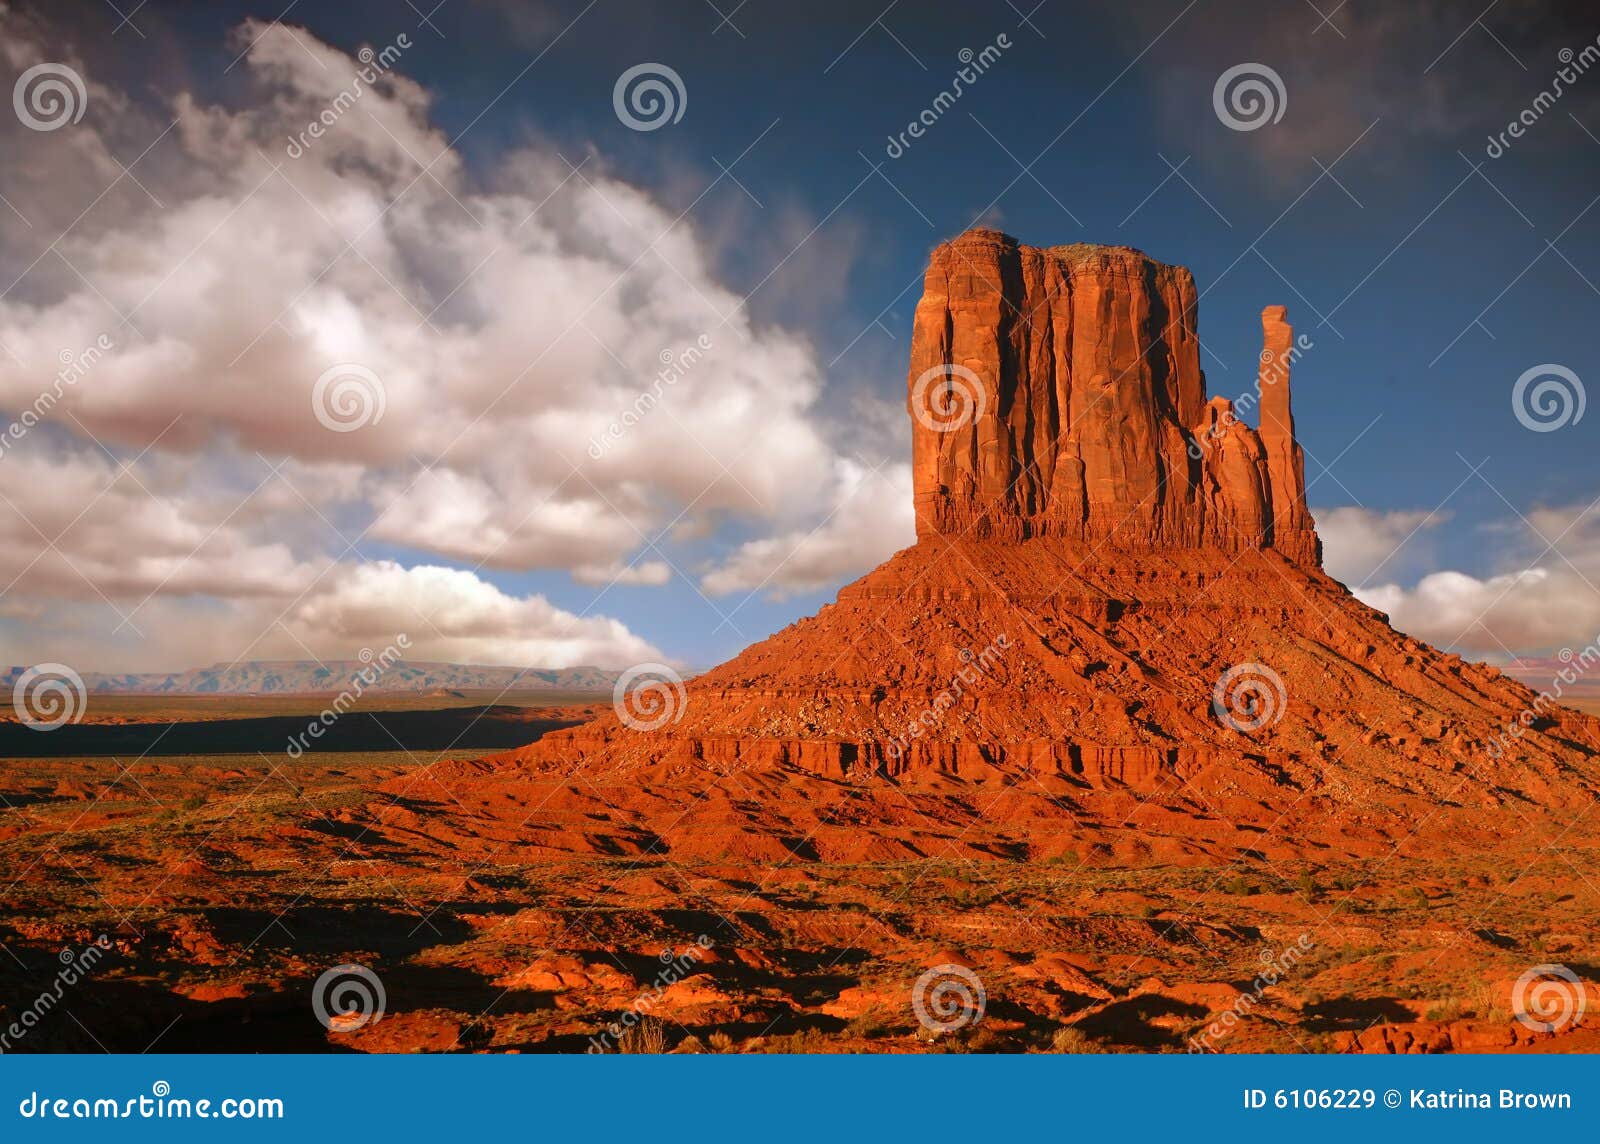 butte in monument valley, navajo nation, arizona